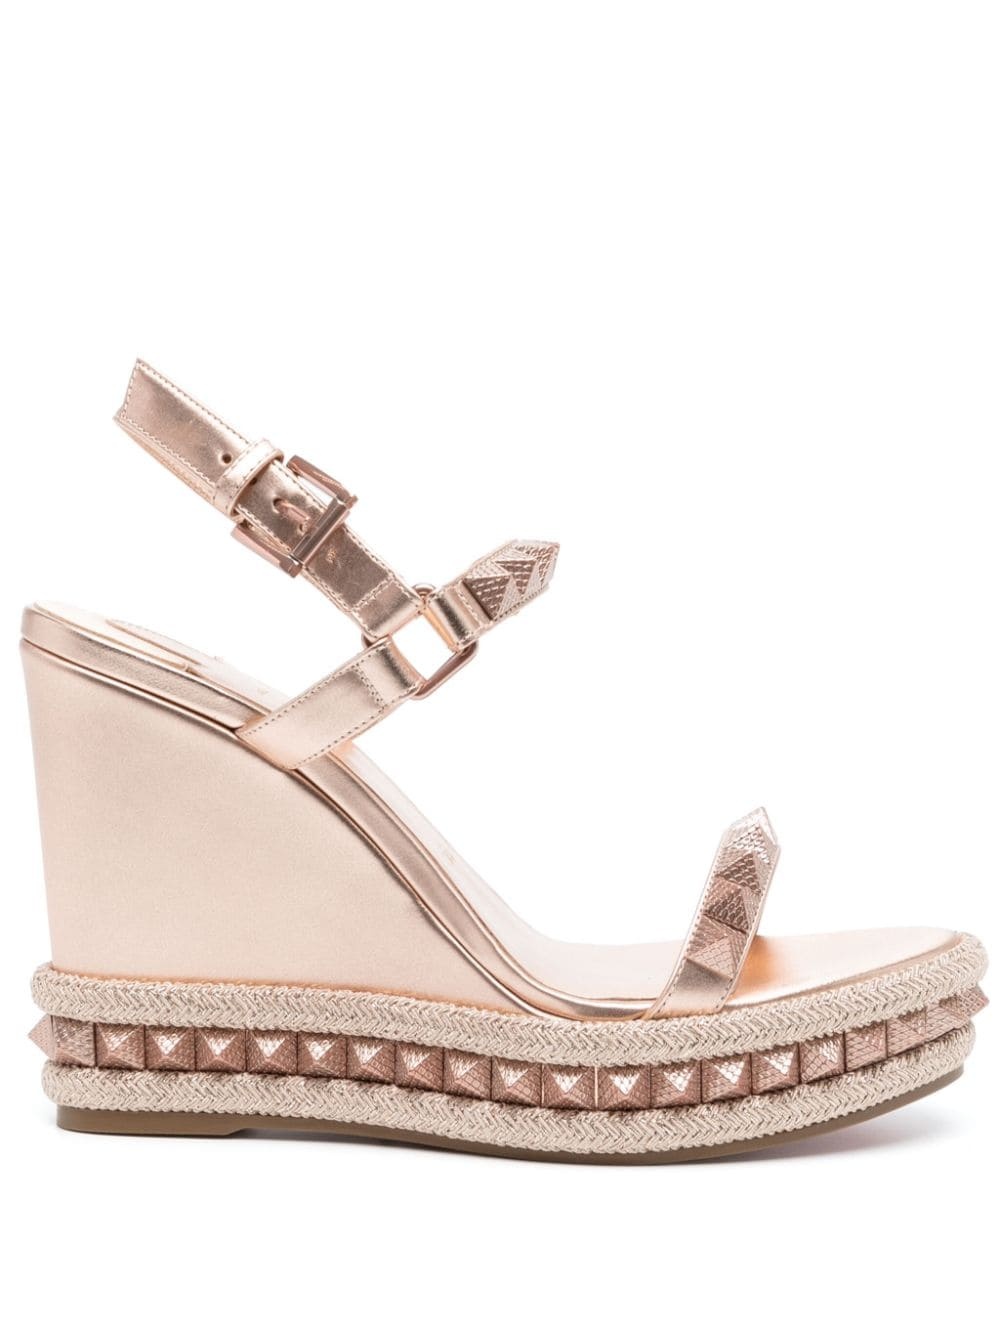 Pyraclou 110mm wedge sandals - 1